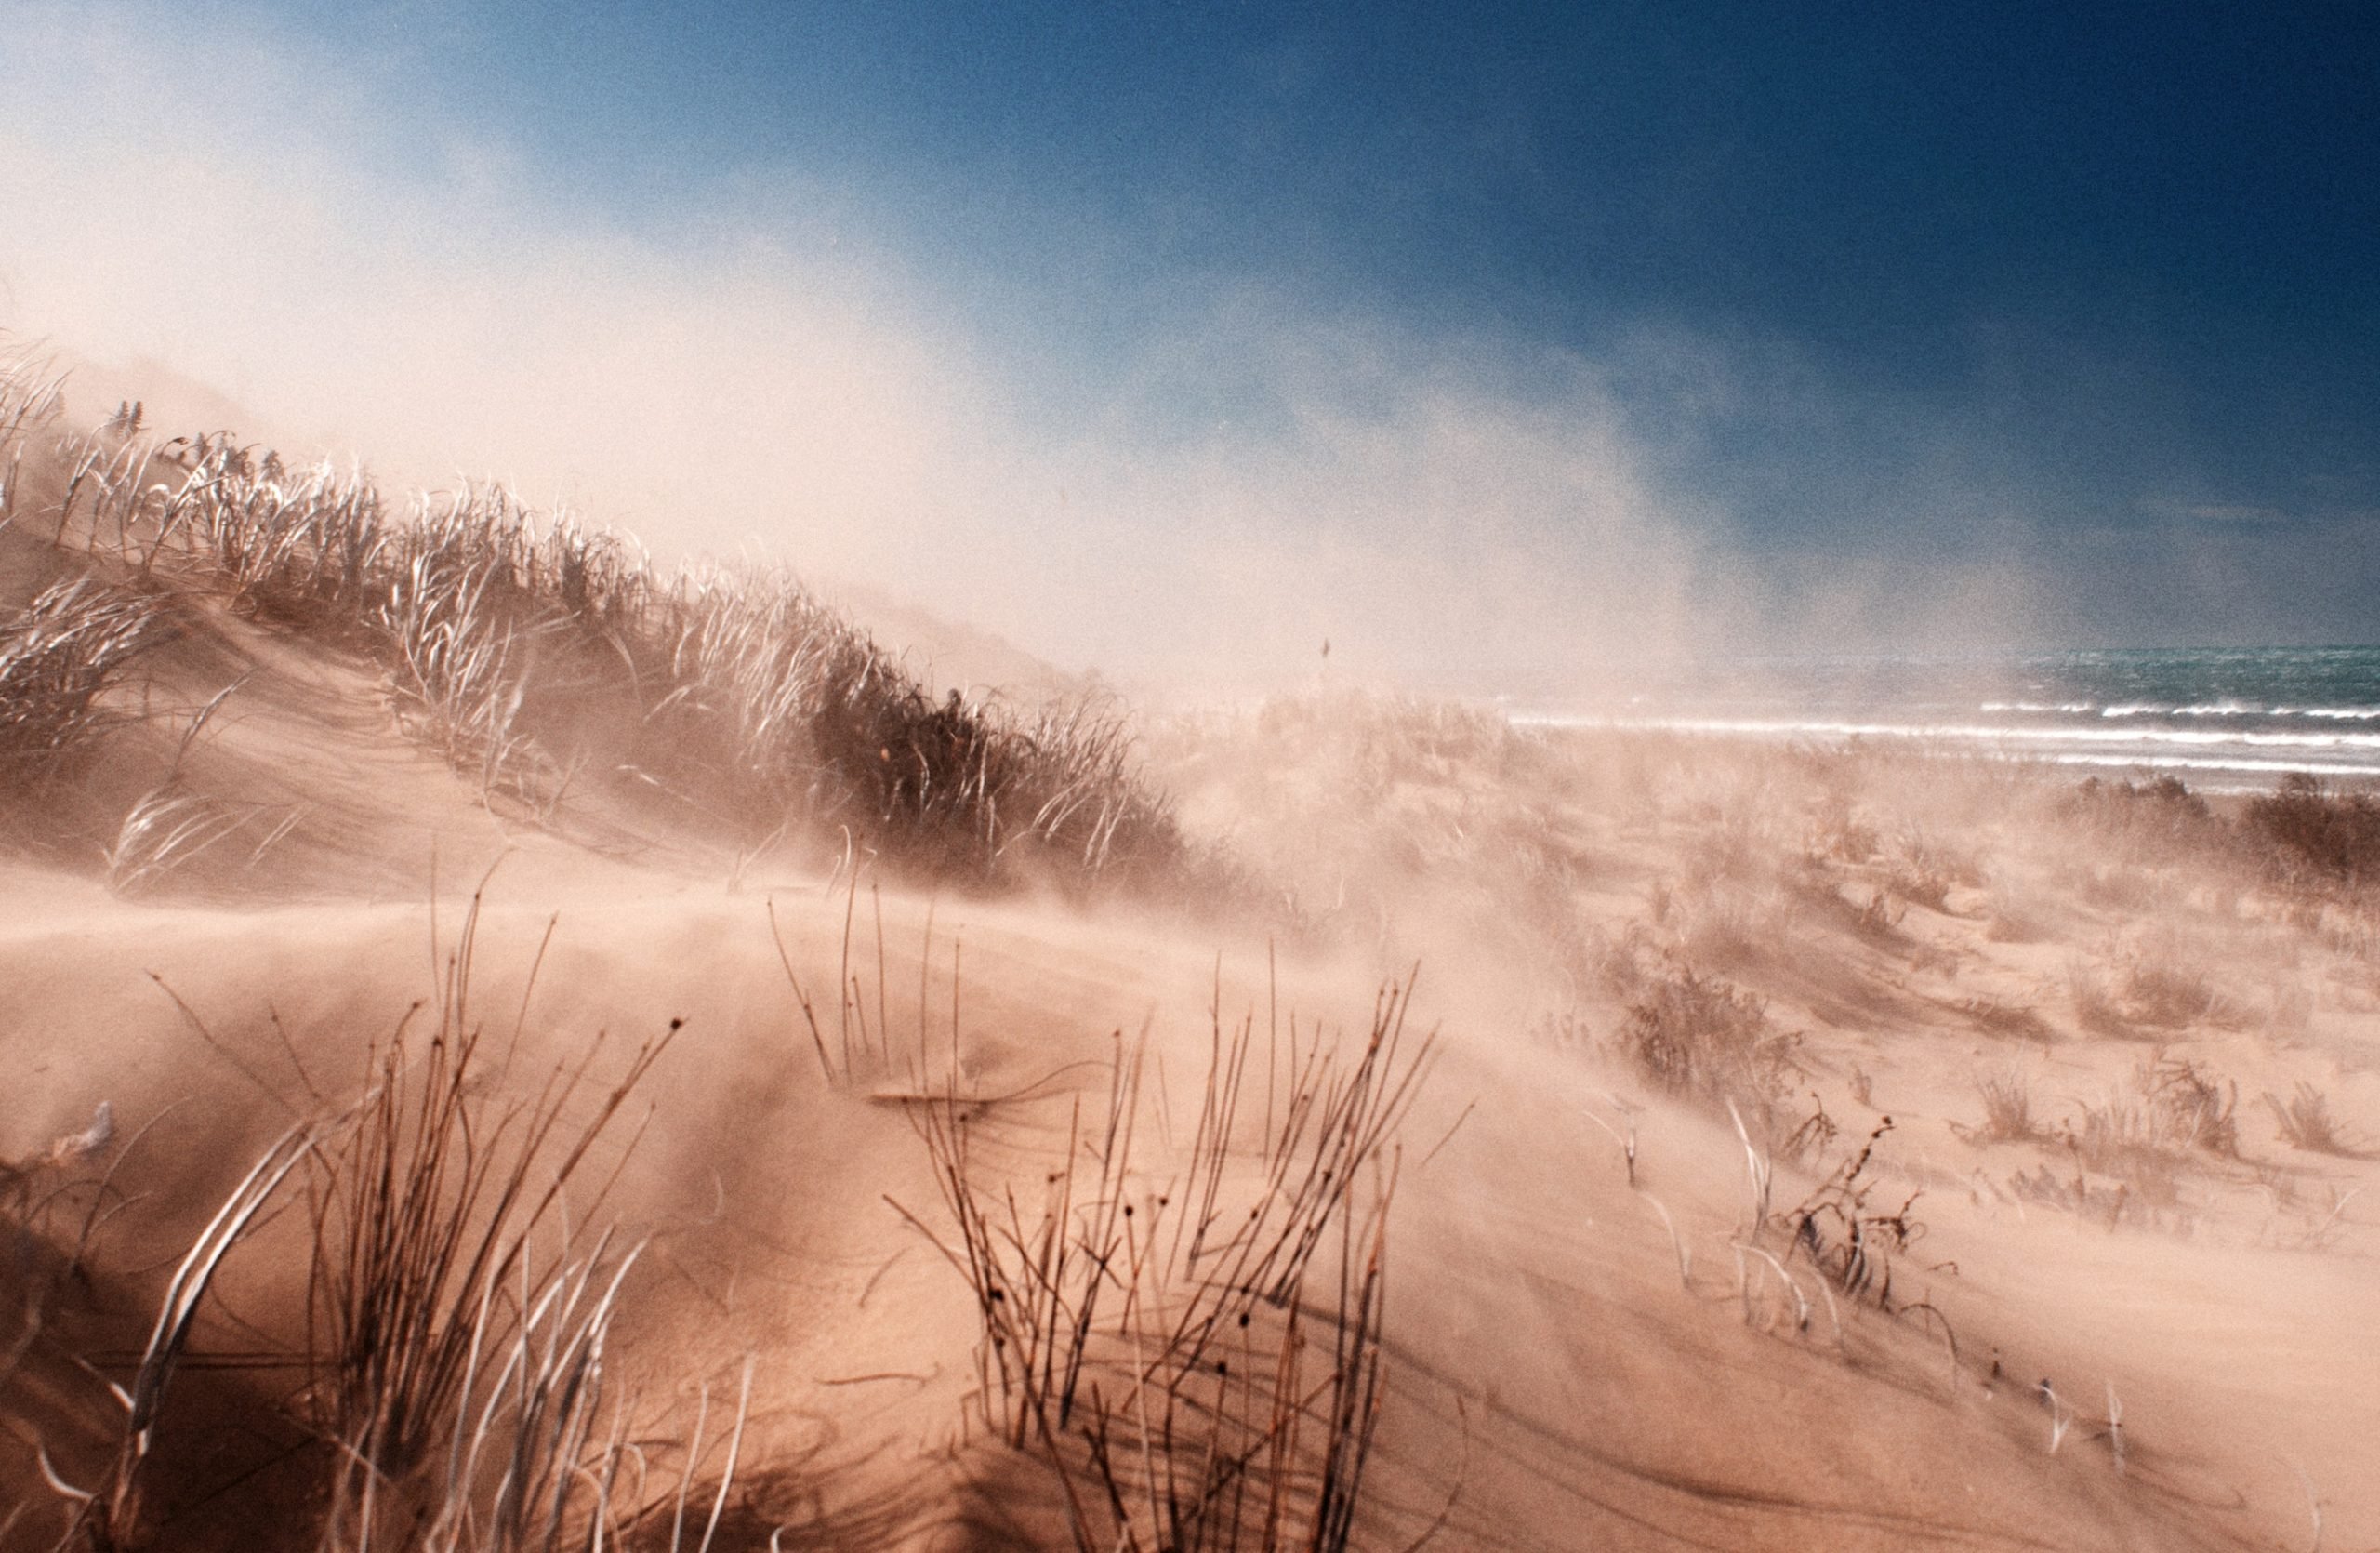 Coorong When the Wind Blows. Local Adelaide fine art photographer Alex Frayne.